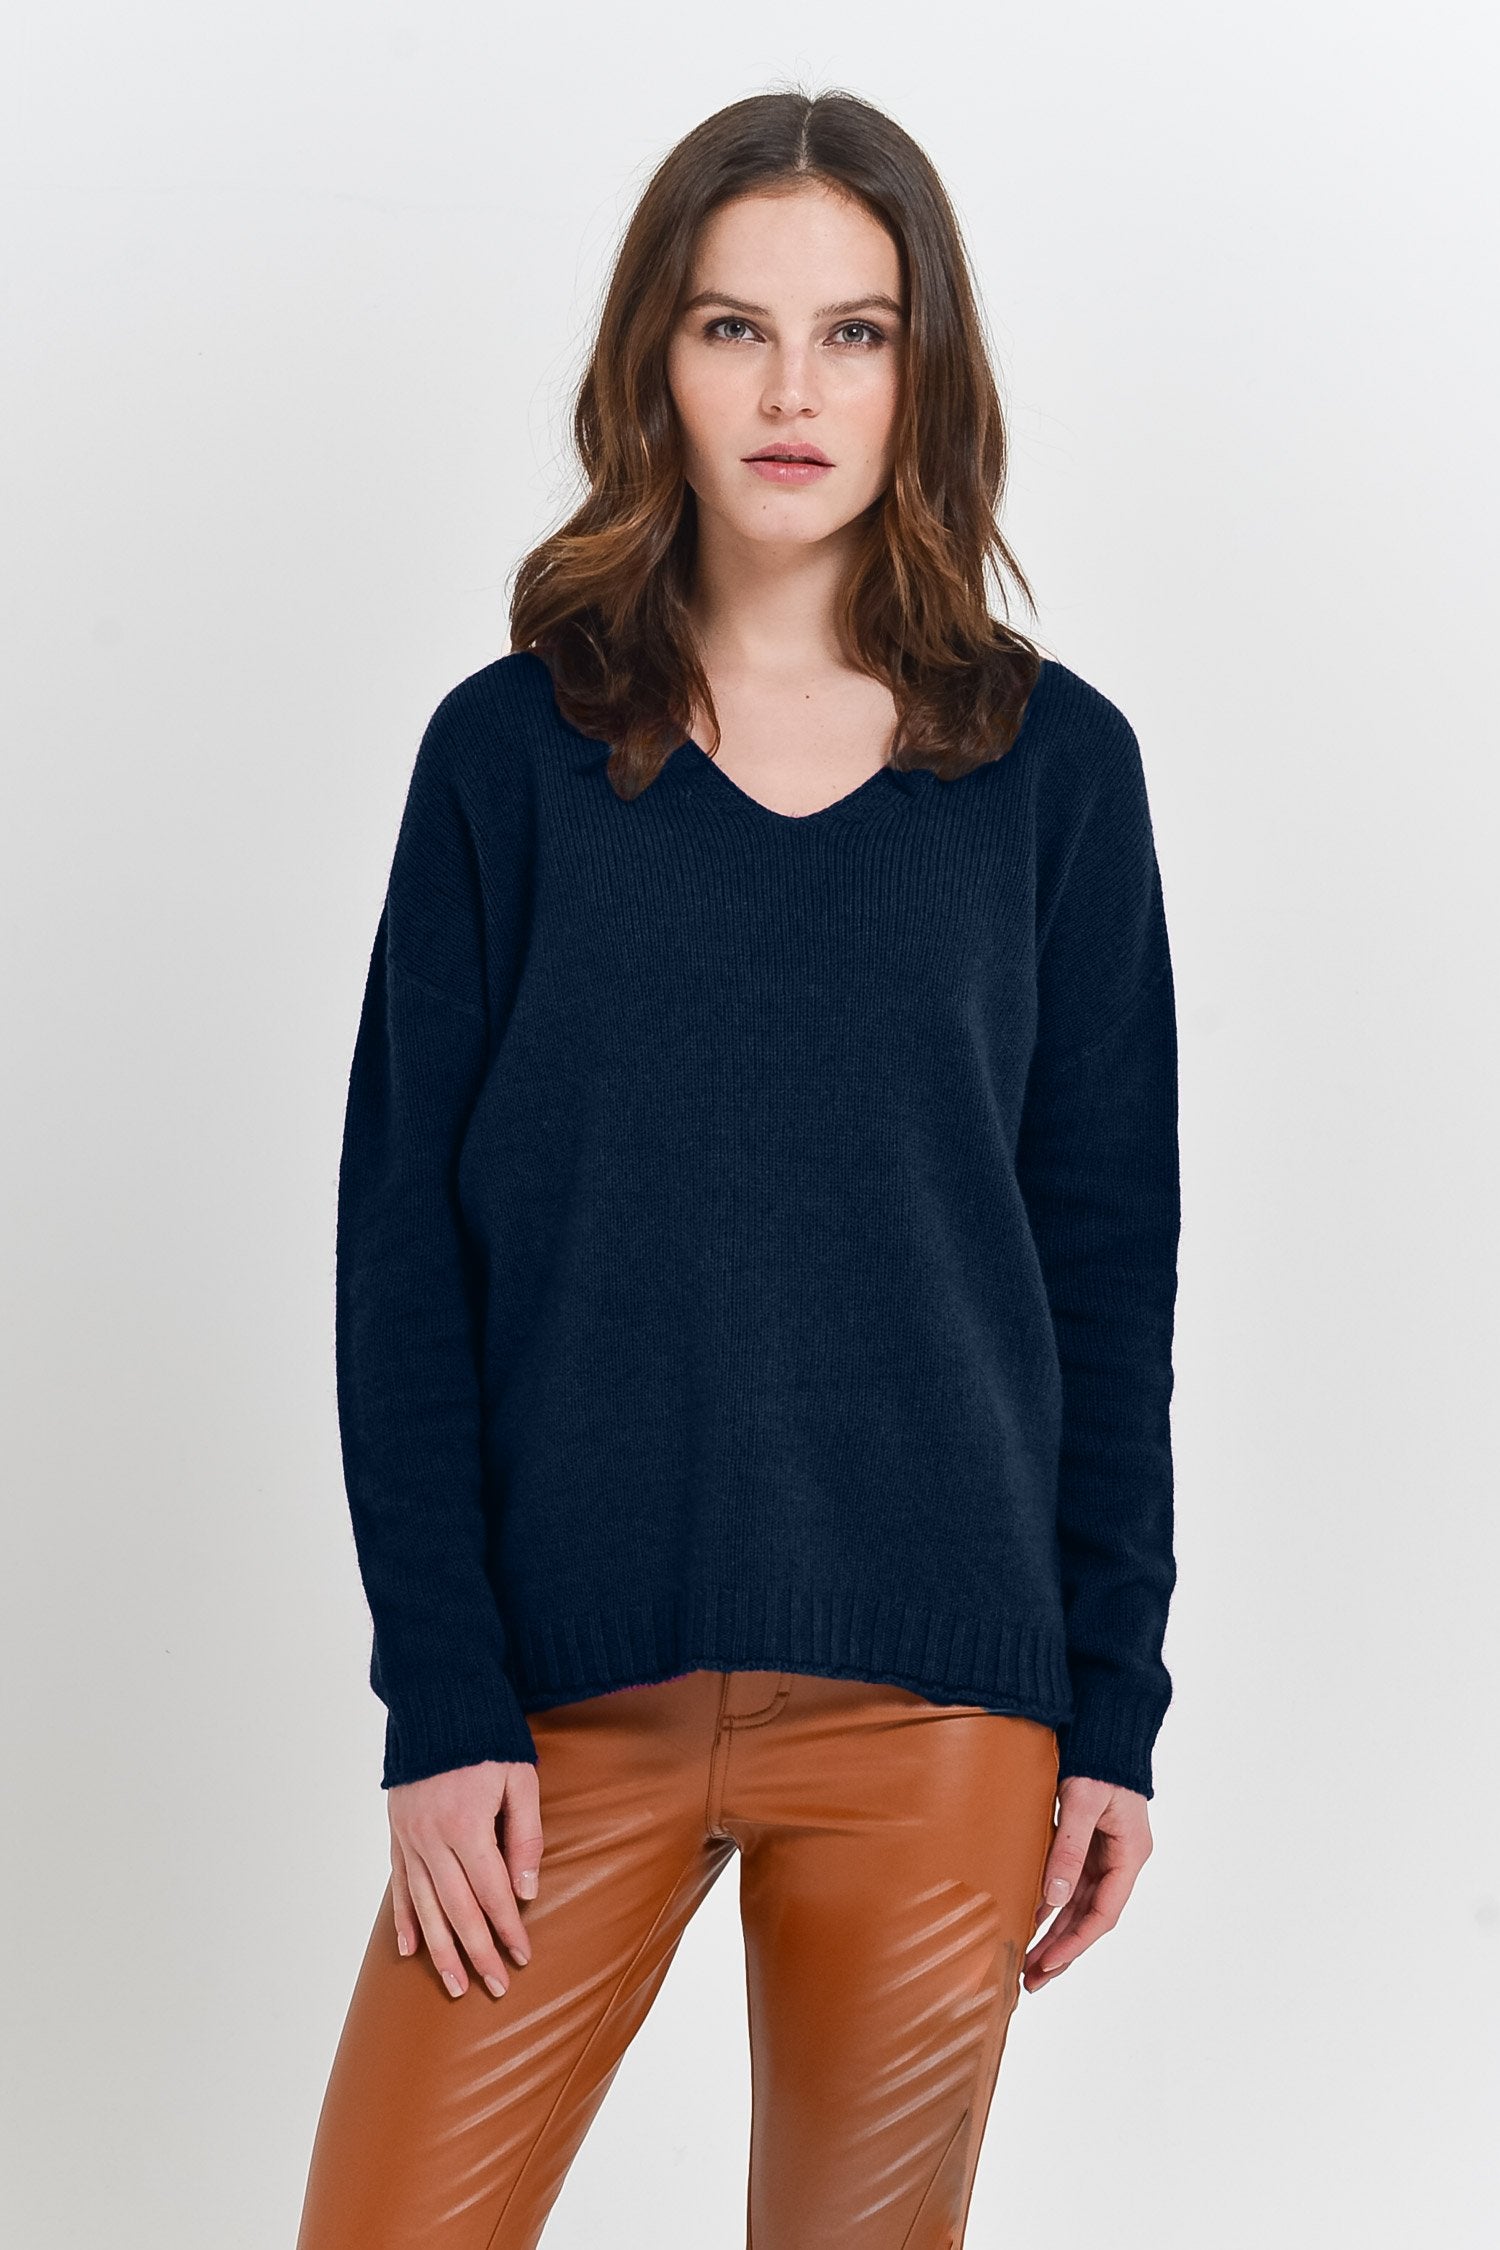 Creeve Abyss - Loose Fit Crew Sweater - Sweaters